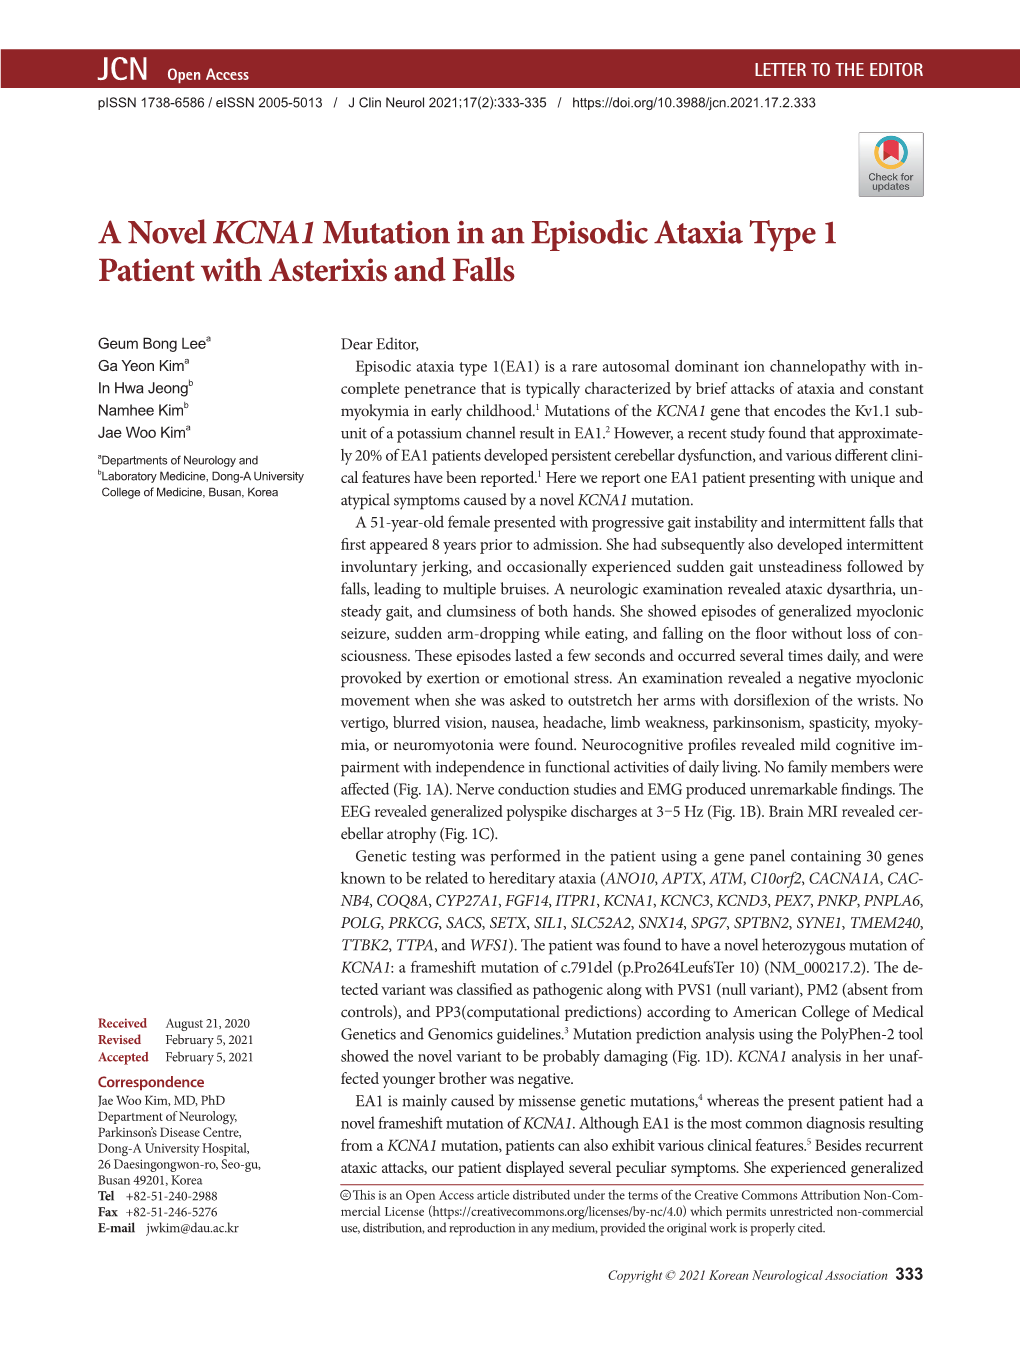 A Novel Kcna1mutation in an Episodic Ataxia Type 1 Patient With